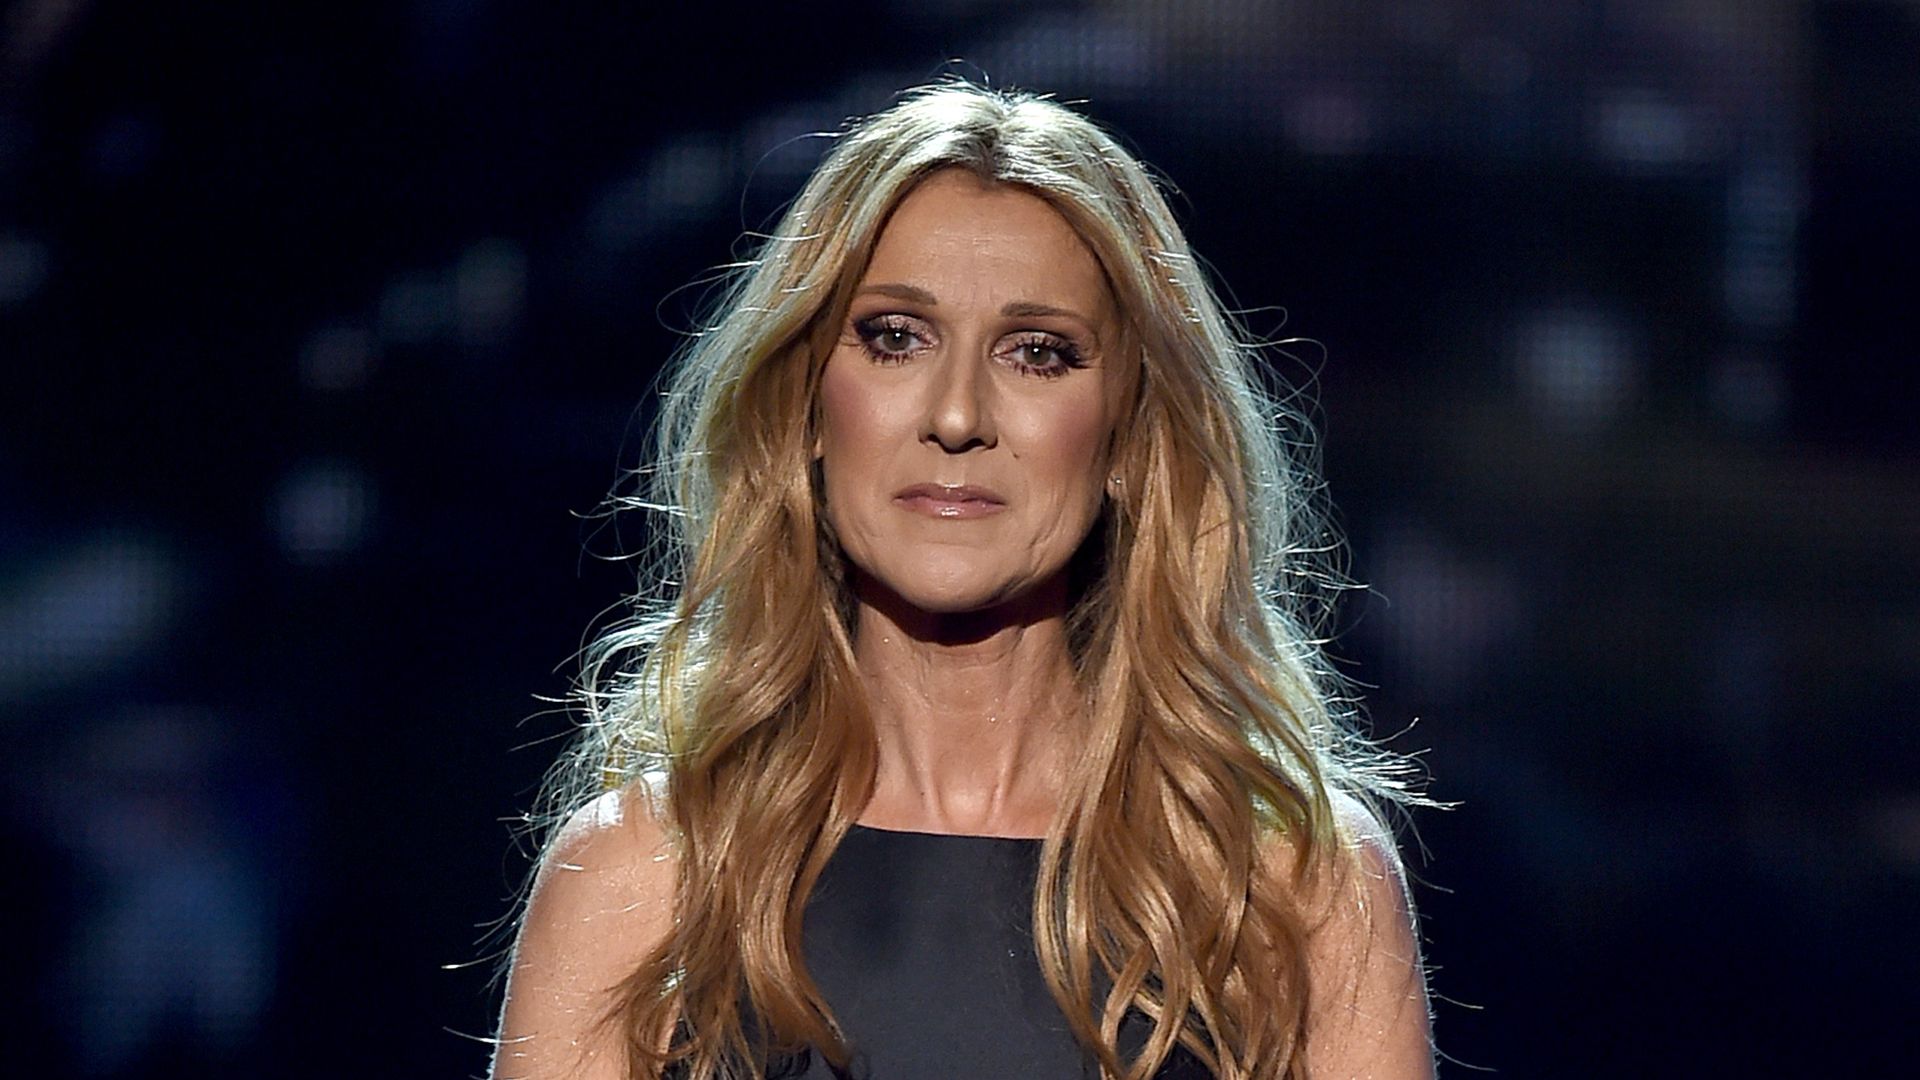 Céline Dion supported by fans as she mourns loss of 'dear friend' with heartbreaking tribute